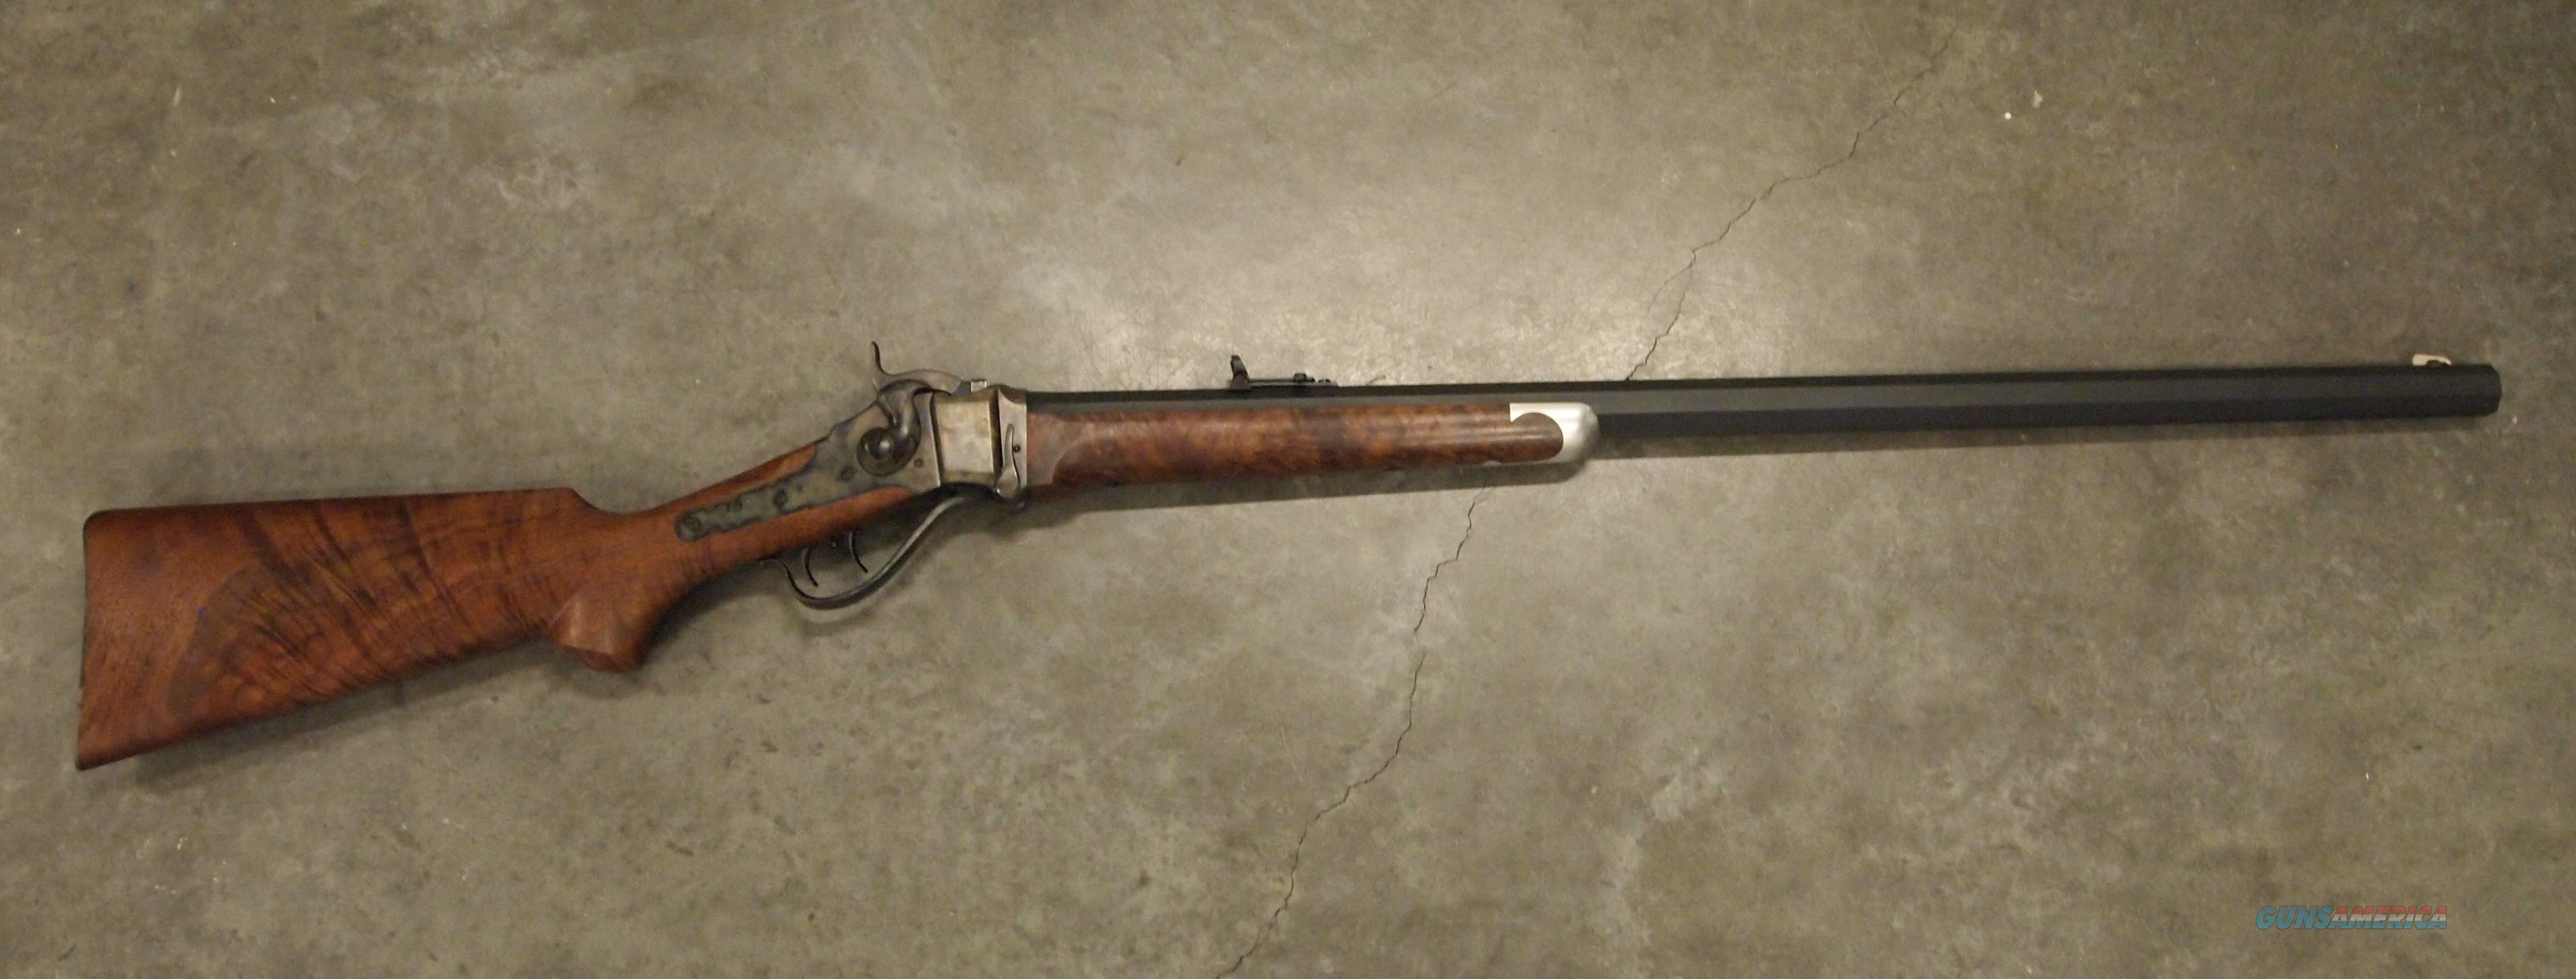 Images of Sharps 1874 Rifle | 4032x1533